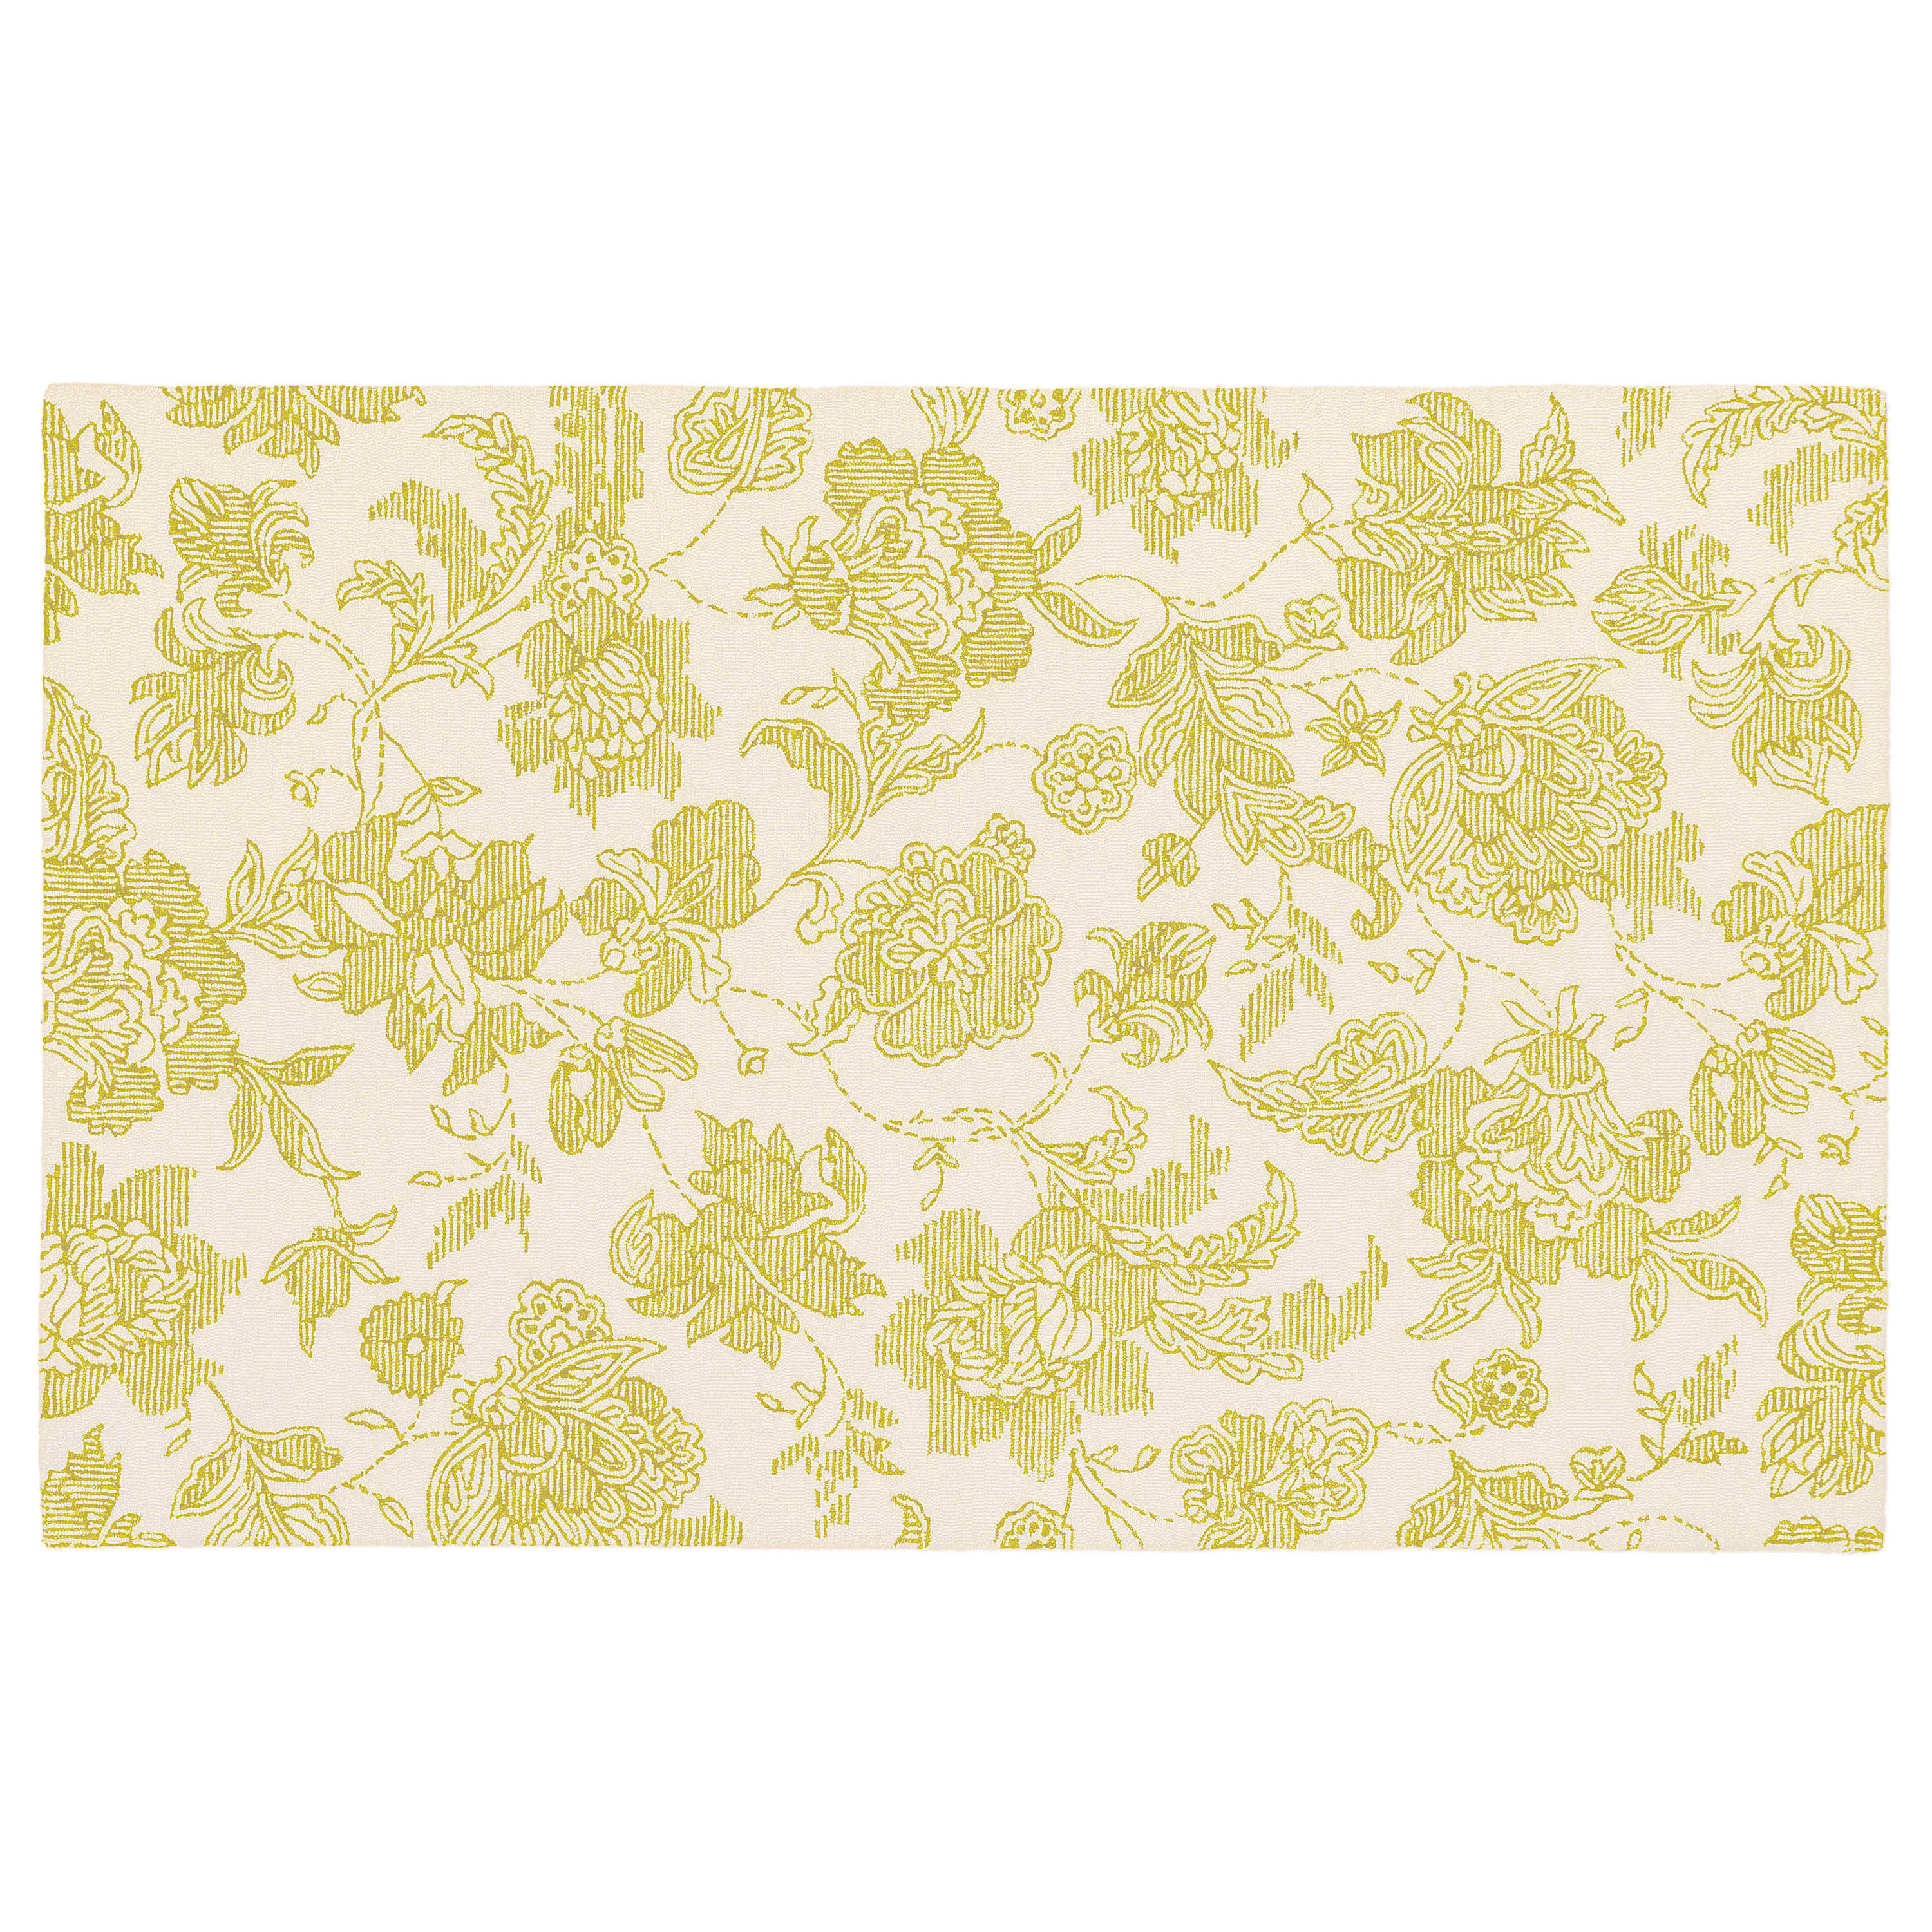 Marquee Floral Rug - Chartreuse - 5' x 8' mackenzie-childs Panama 0